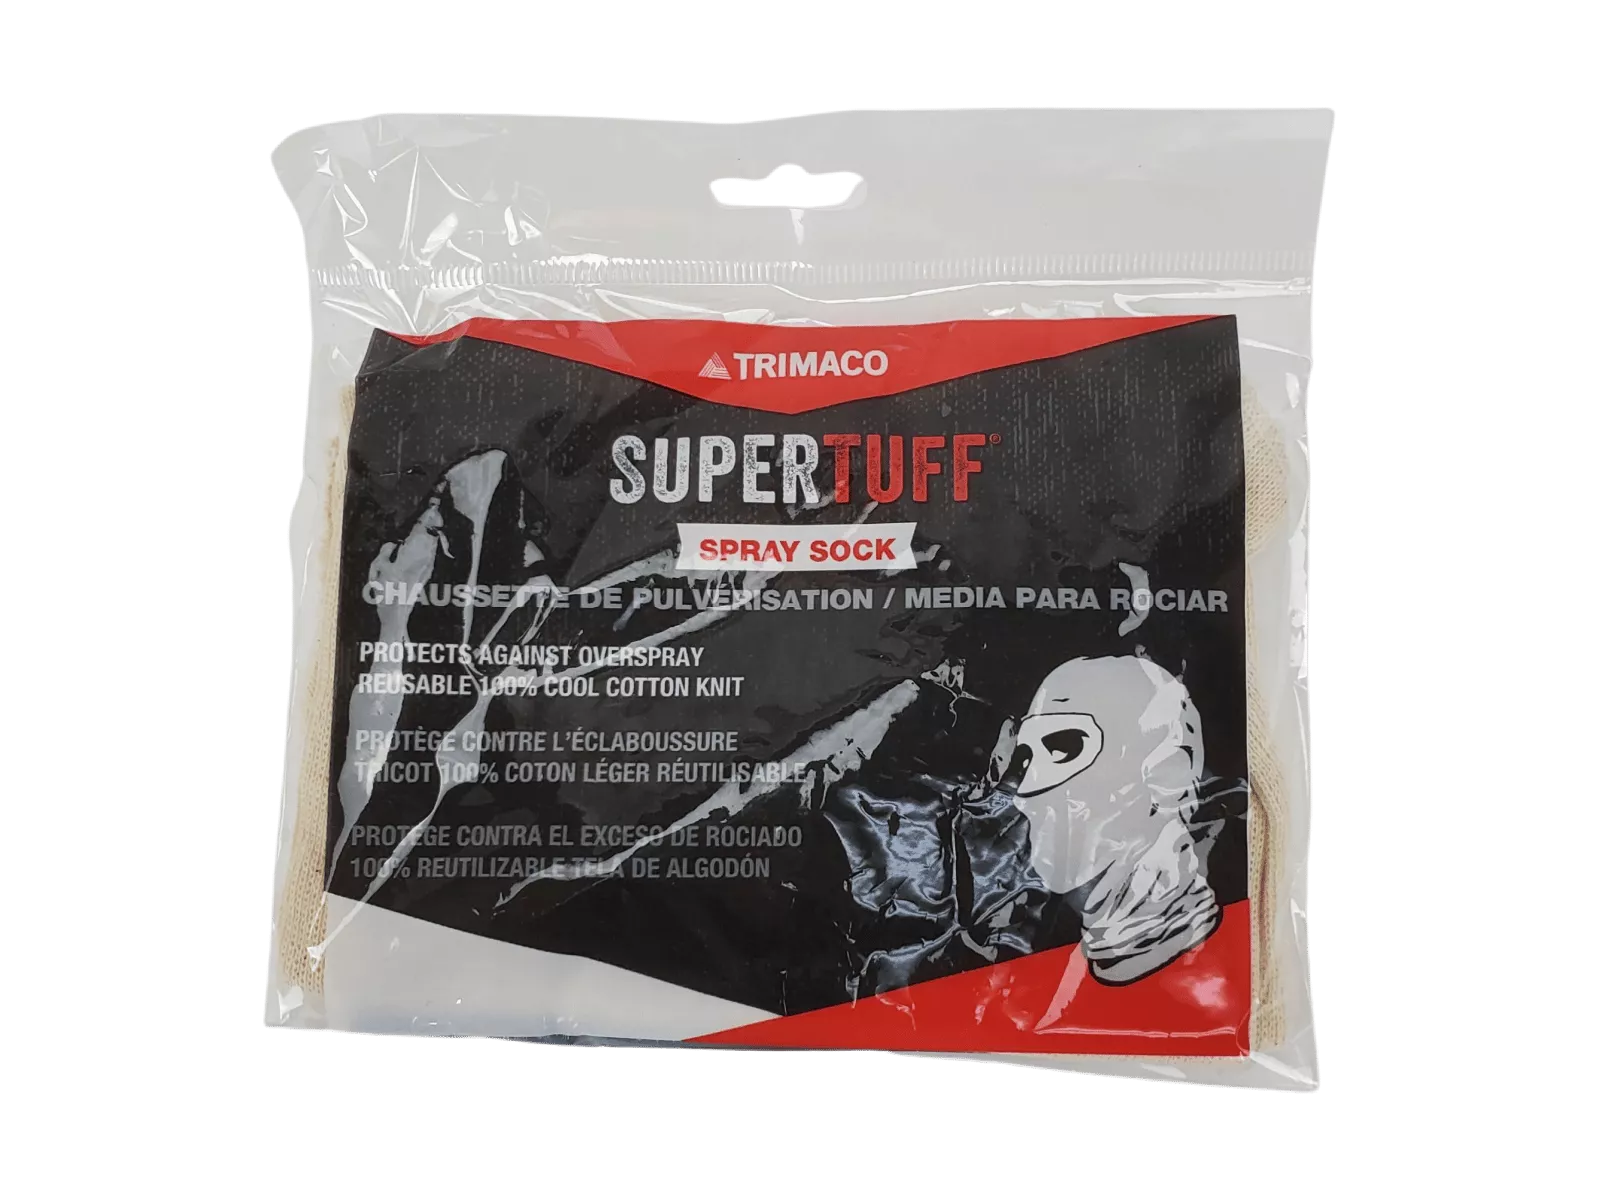 Clear Packaging of Trimaco Supertuff Spray Sock with Black and Red Label